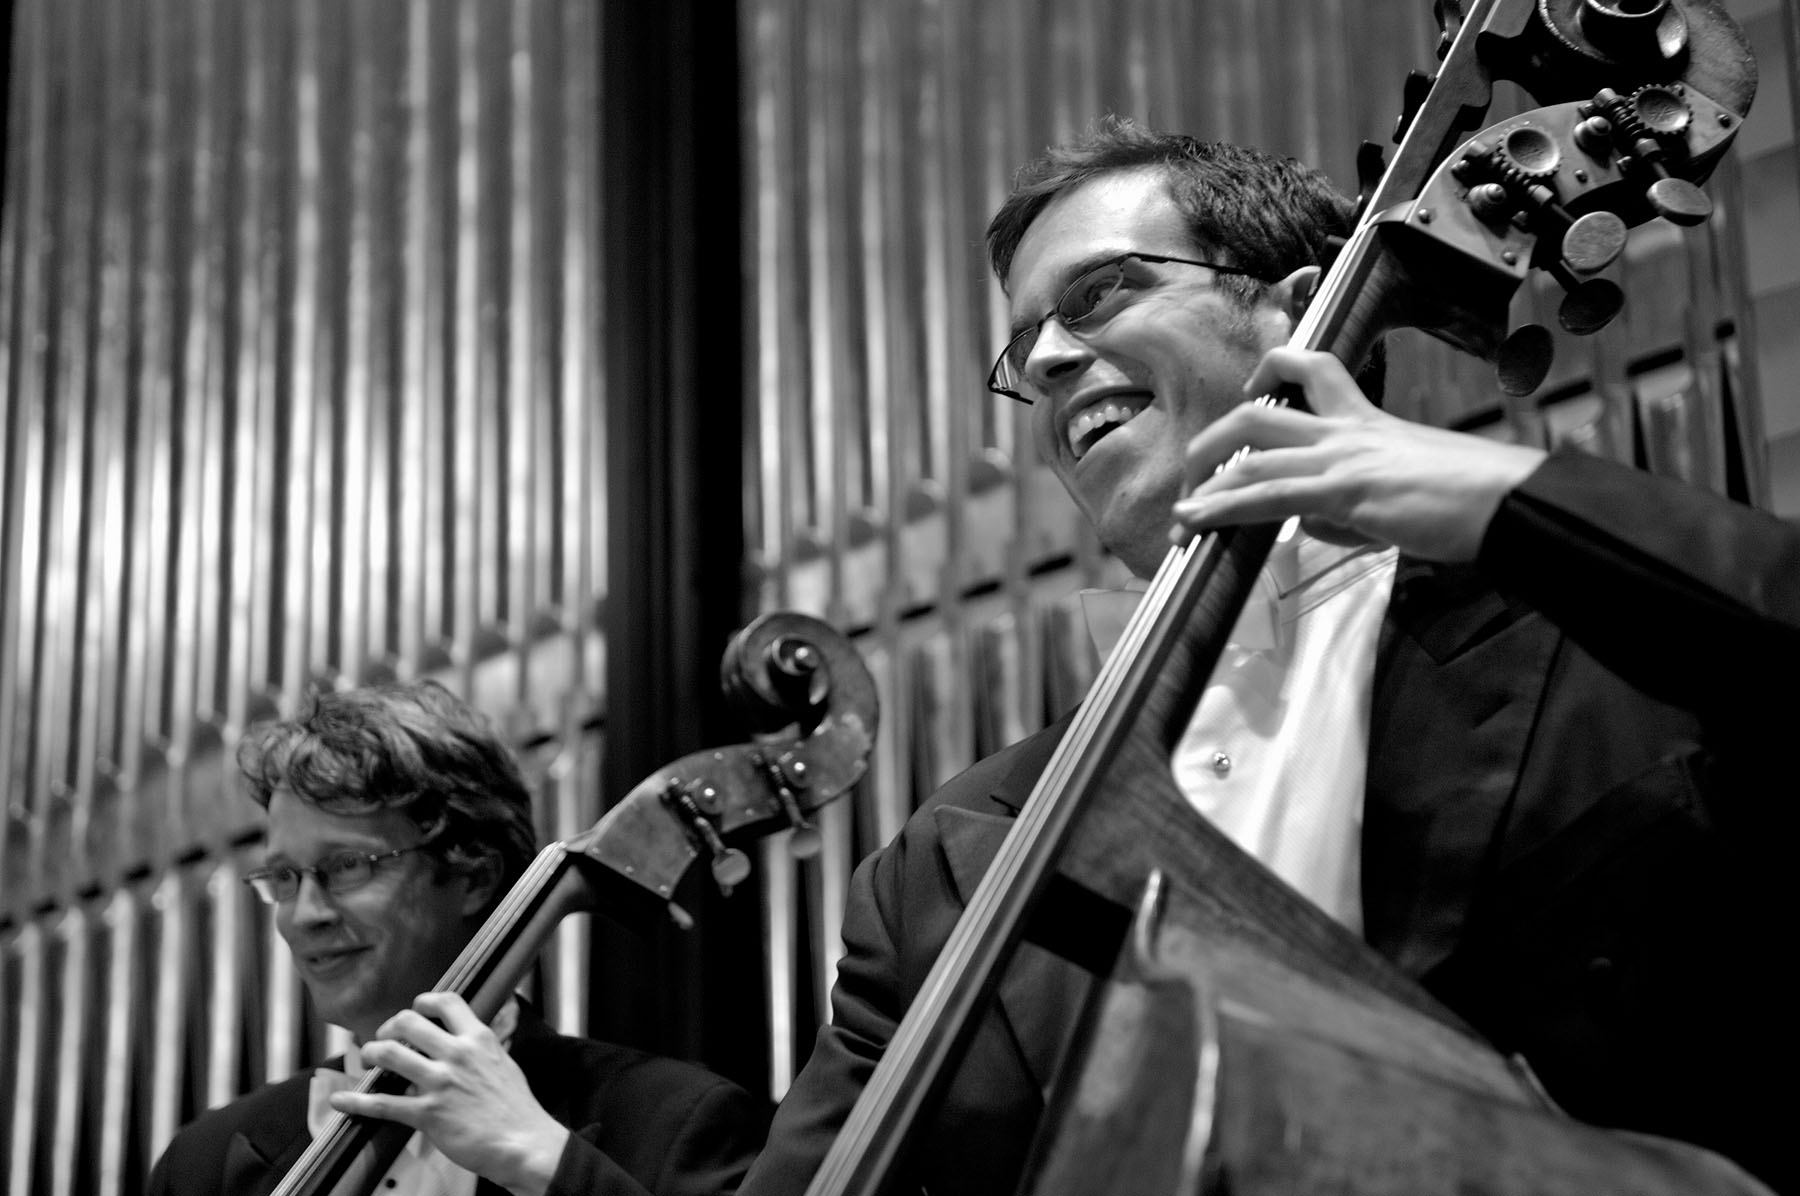 Two musicians playing the bass and smiling broadly.